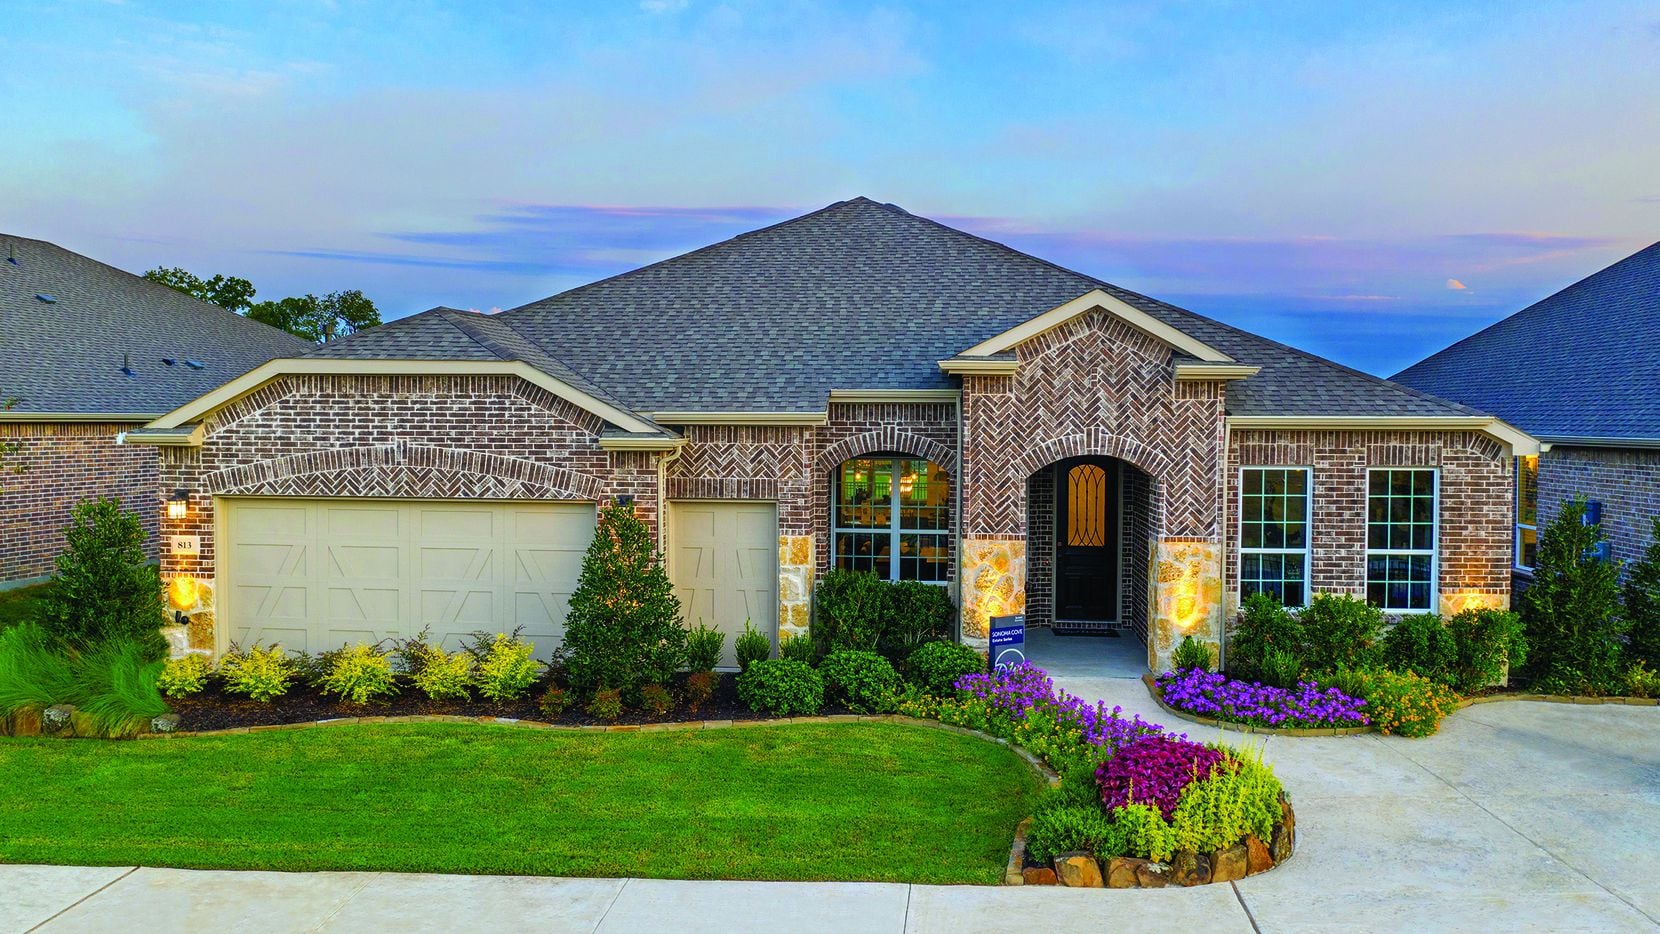 Del Webb’s 55-plus community at Trinity Falls offers one-story floor plans with 1,300 to 2,600-plus square feet of living space.